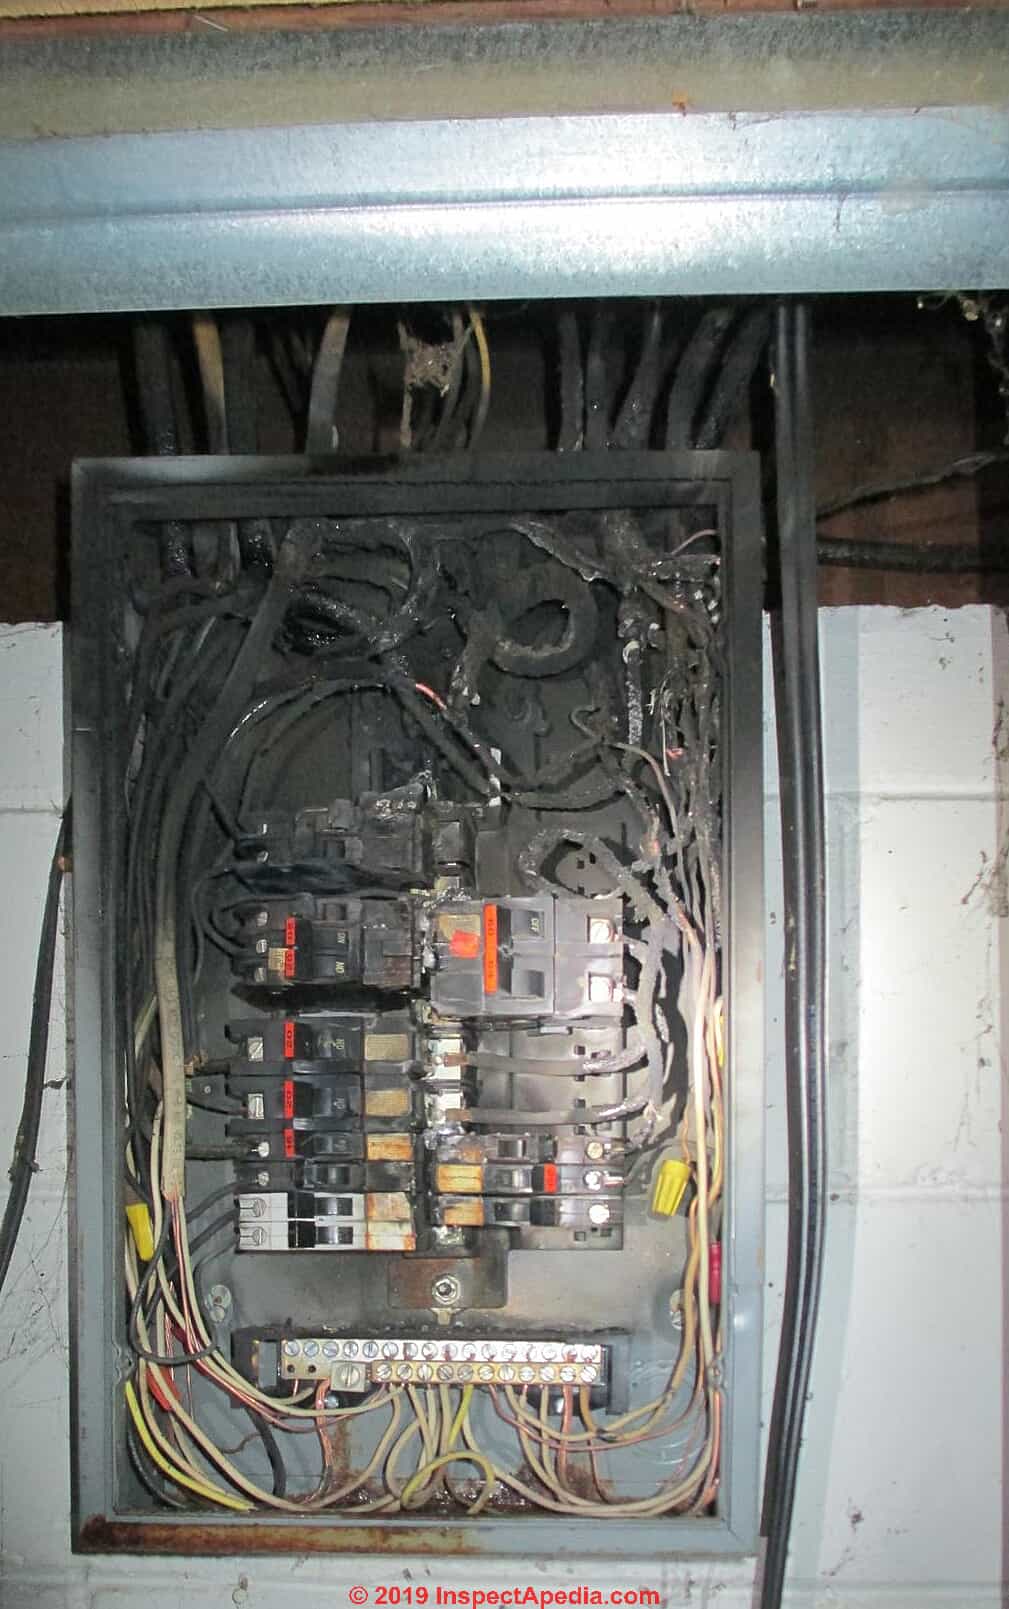 Hazardous Electric Panels You Should Have Replaced Right Away